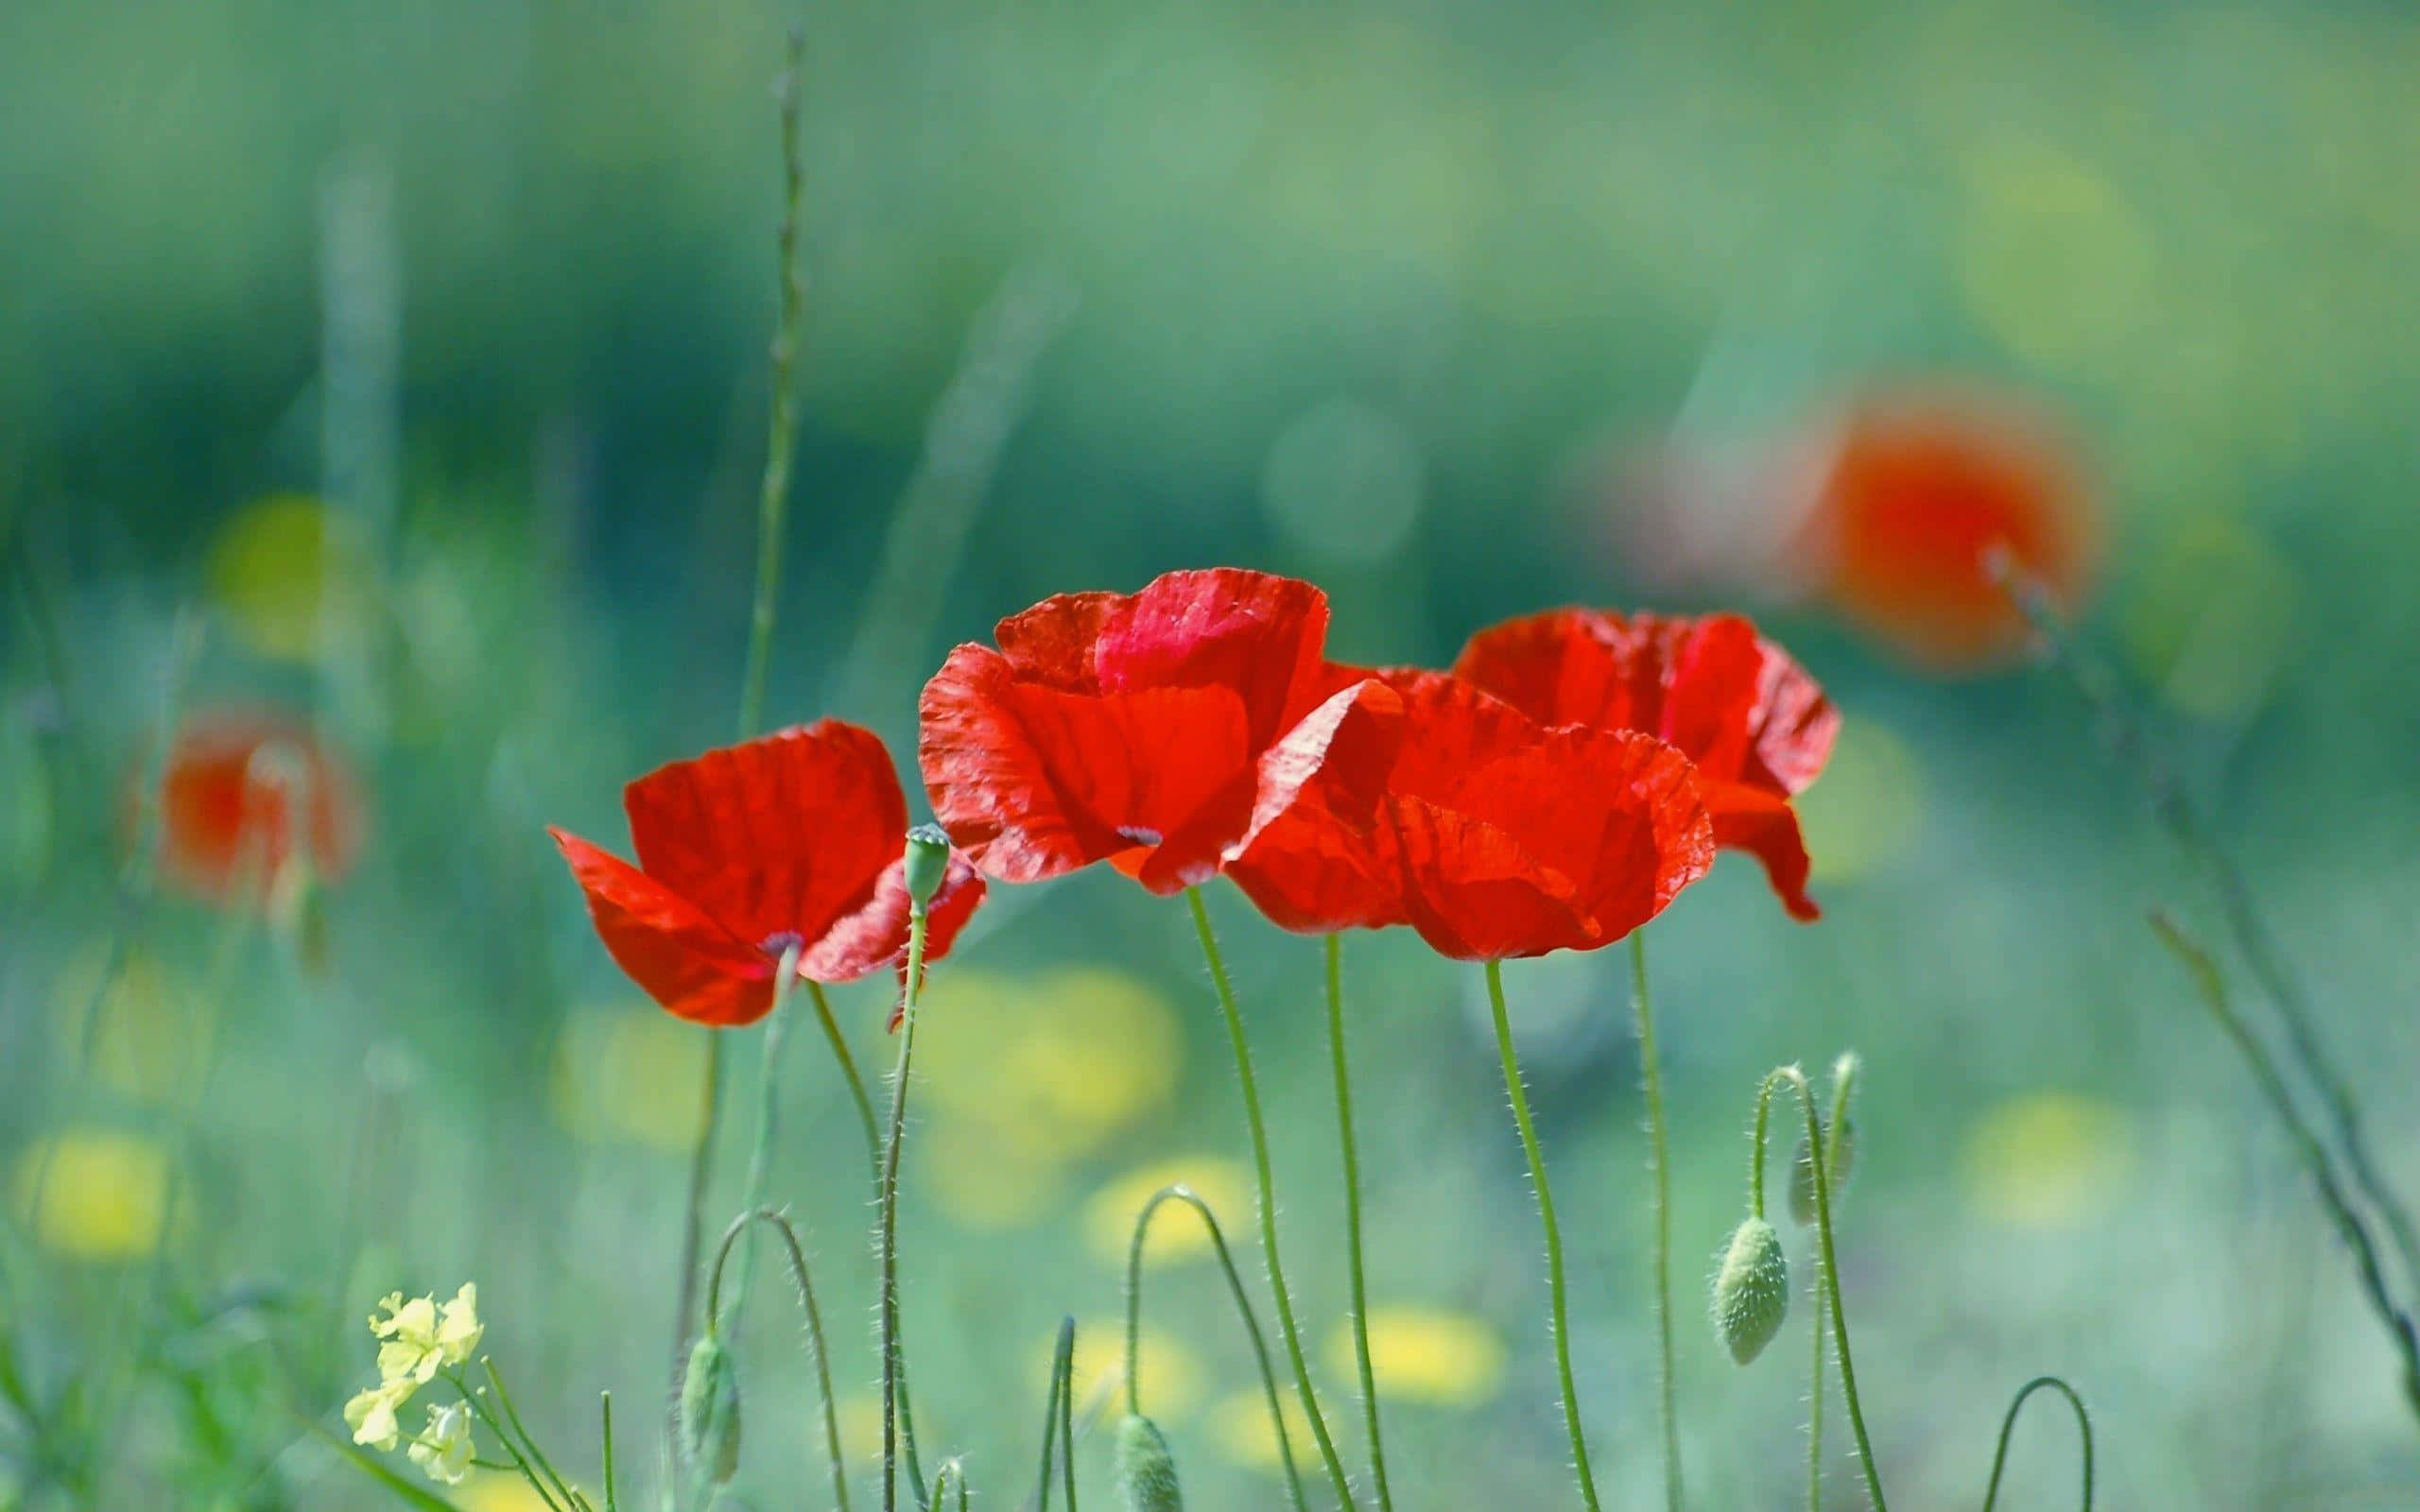 Bright red poppy flowers in the meadow.